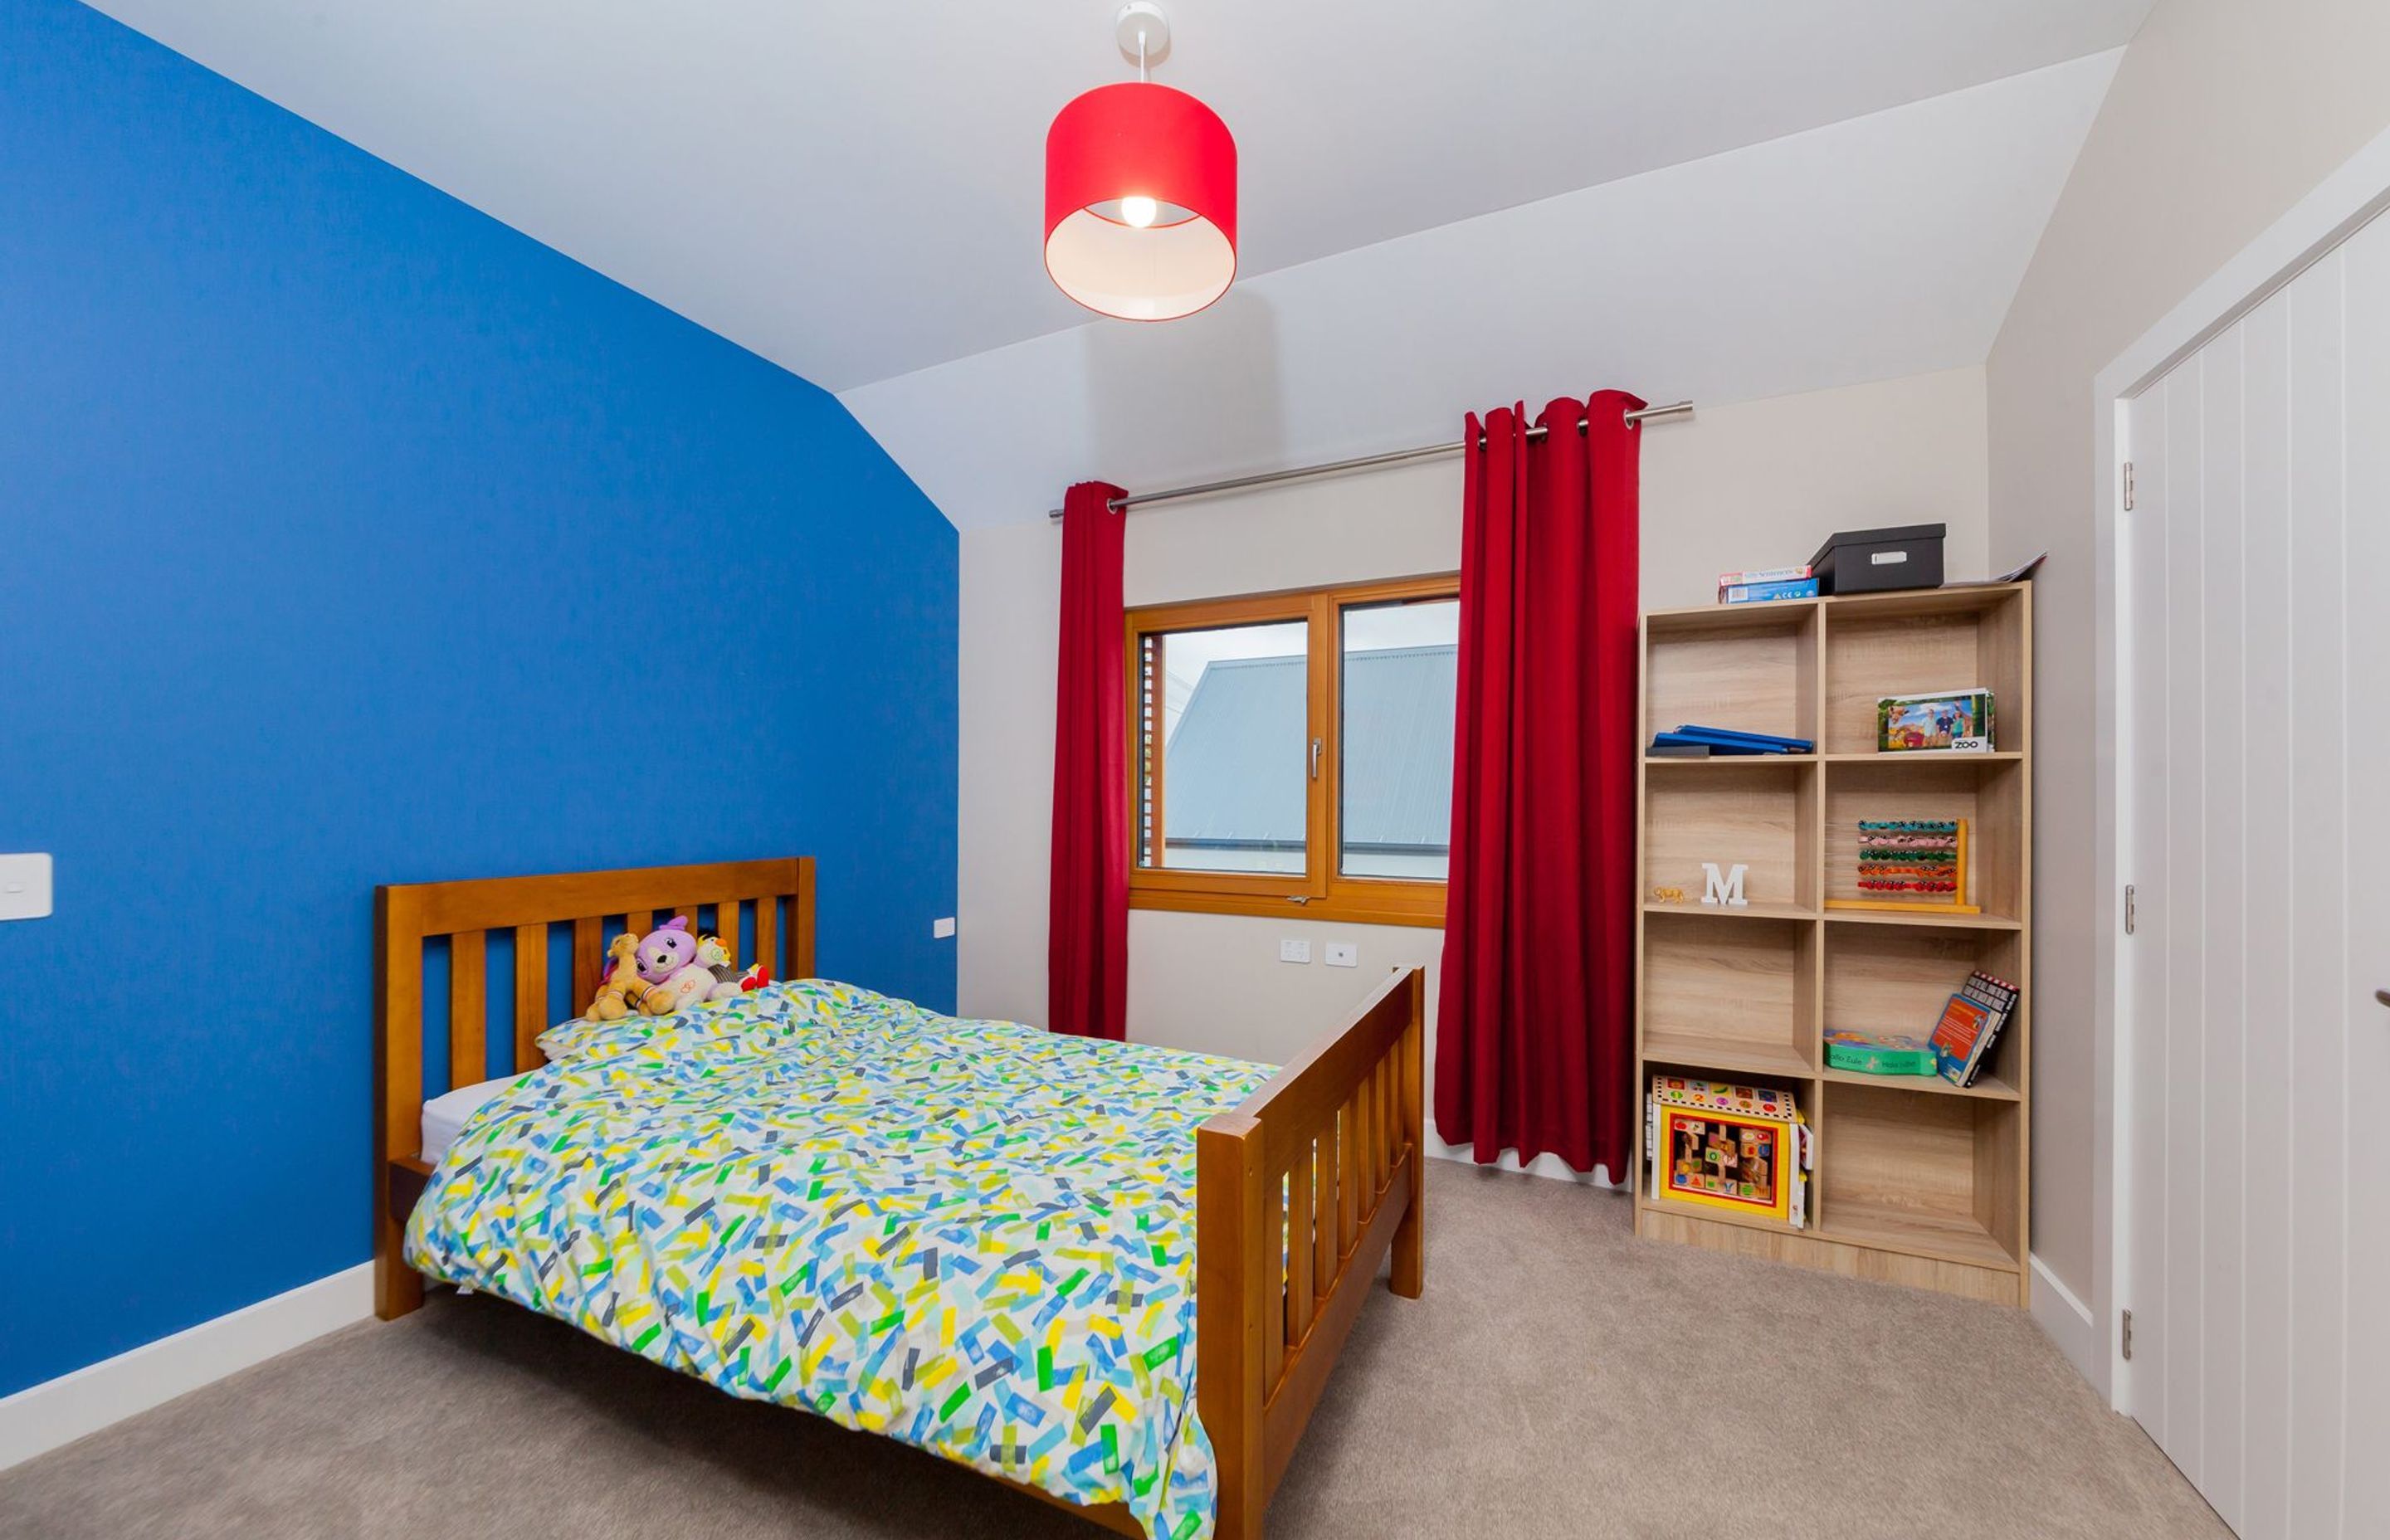 The children's bedrooms are colourful and fun.